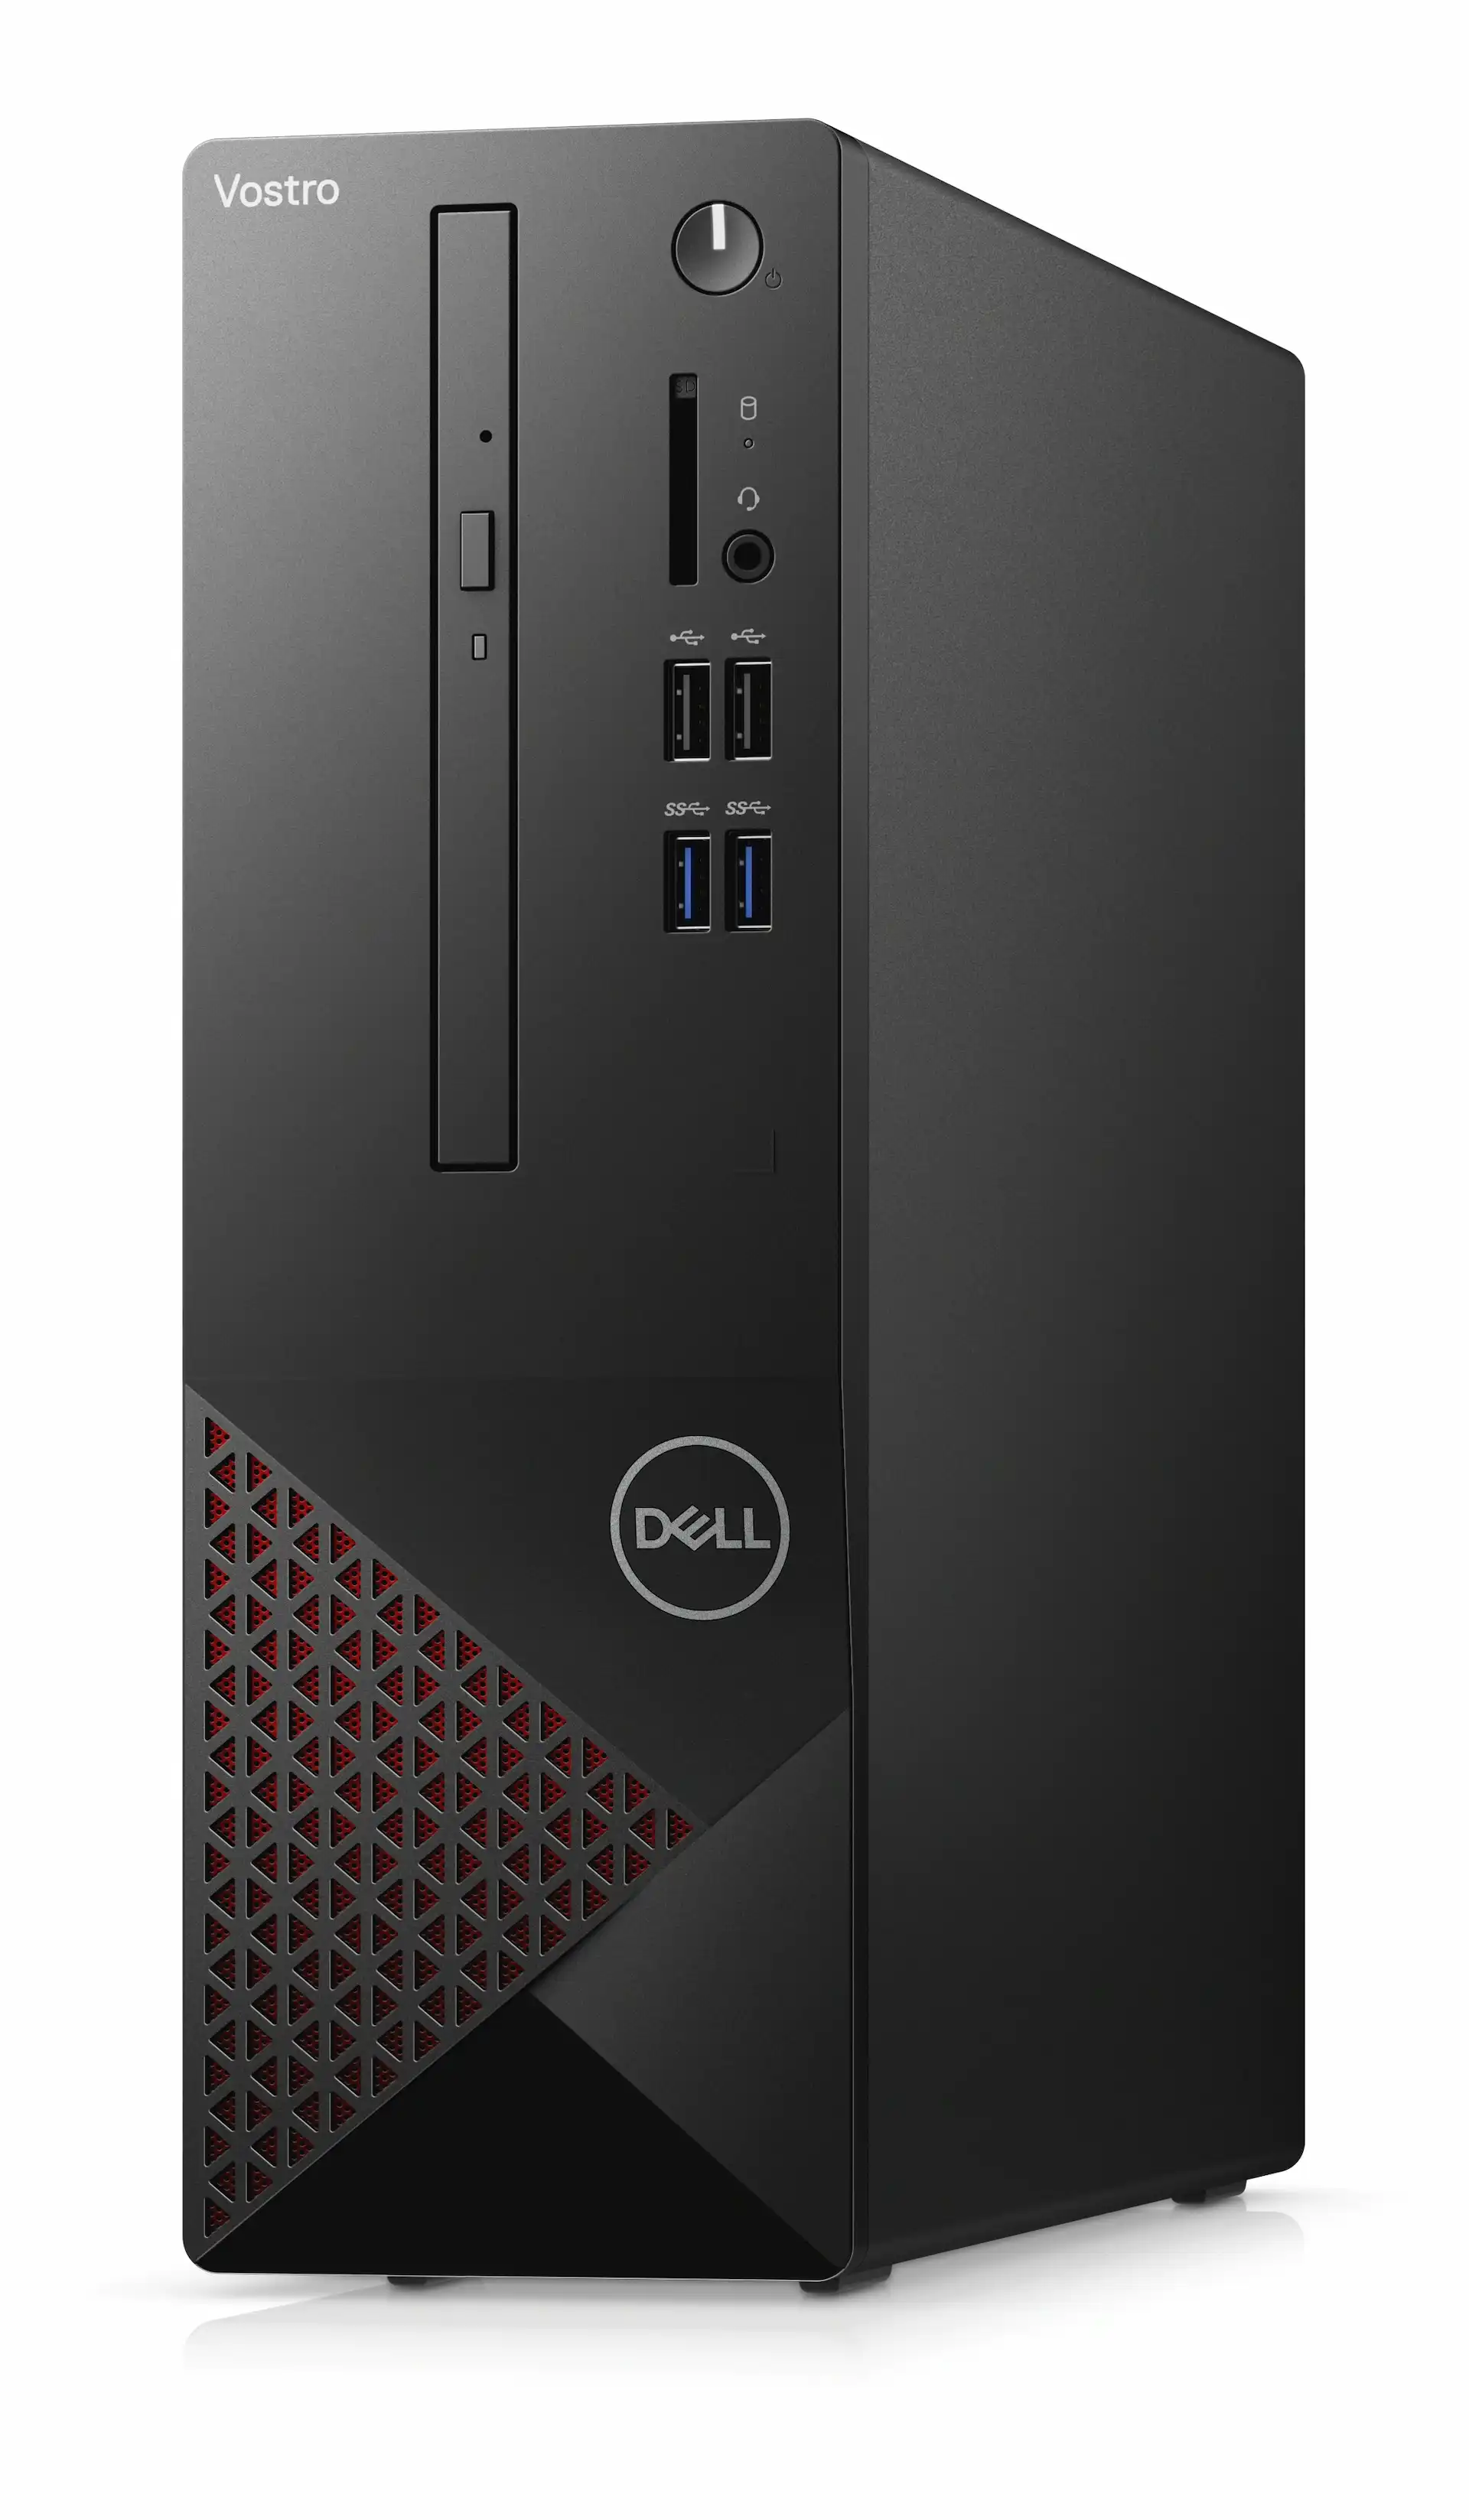 Dell additional 5% Off Vostro Small Desktop with discount code